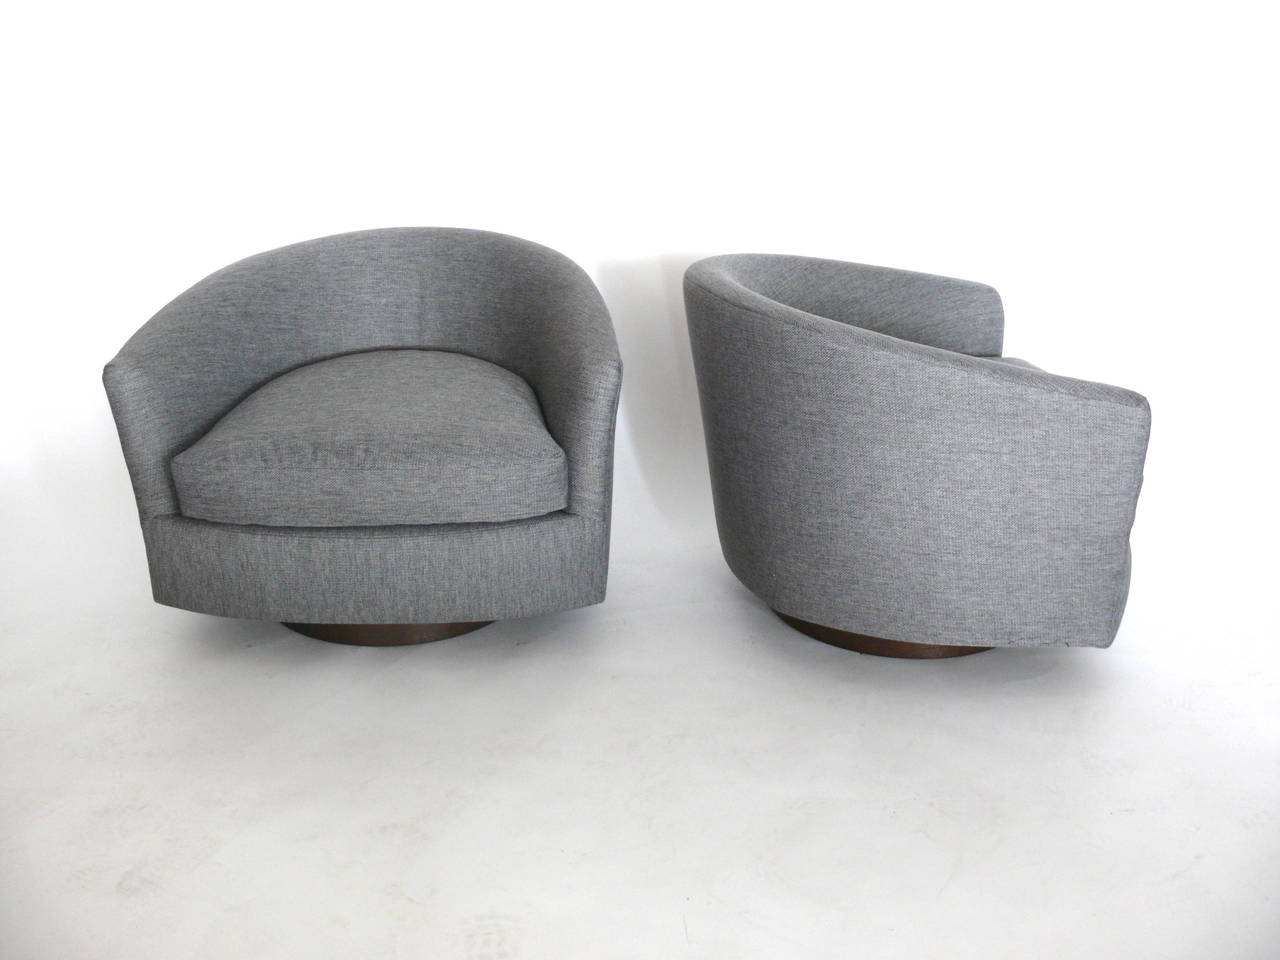 Handsome pair of grey linen bucket chairs in the style of Milo Baughman. Clean lines and newly reupholstered. Chairs sit upon dark walnut swivel bases. Very comfortable. Great for the home or office.